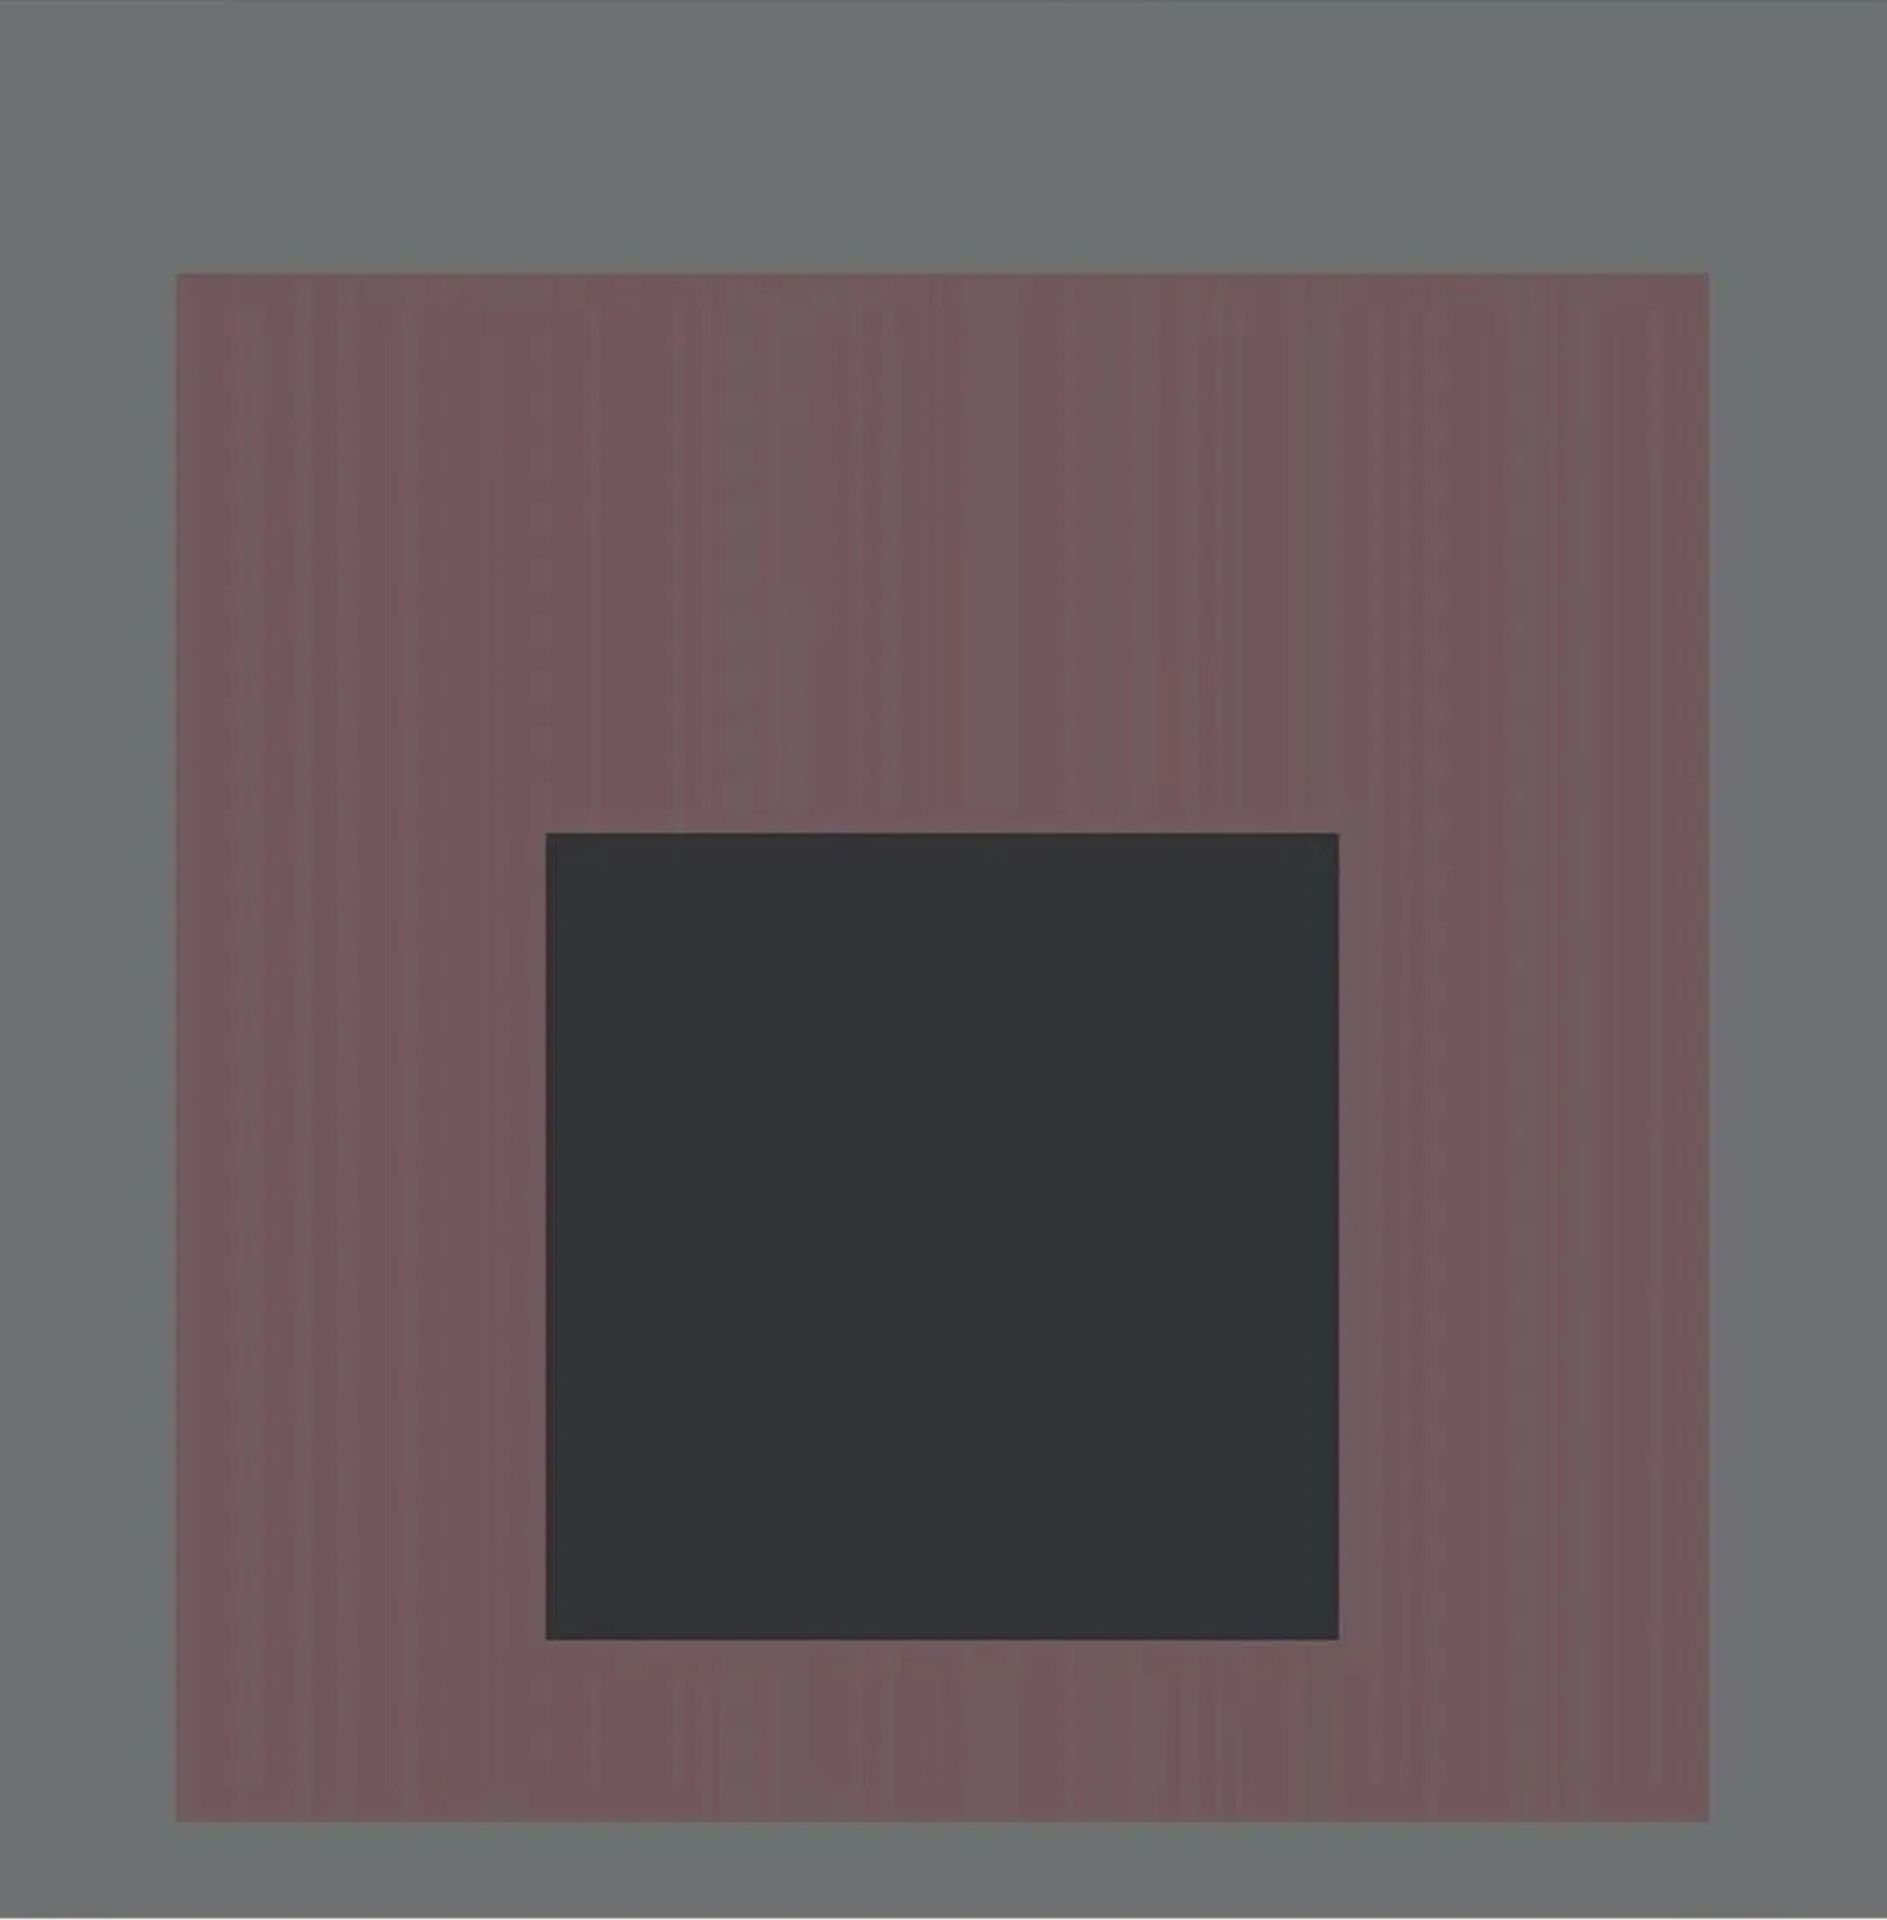 Josef Albers Homage to the Square "Gray, Purple" Offset Lithograph, After